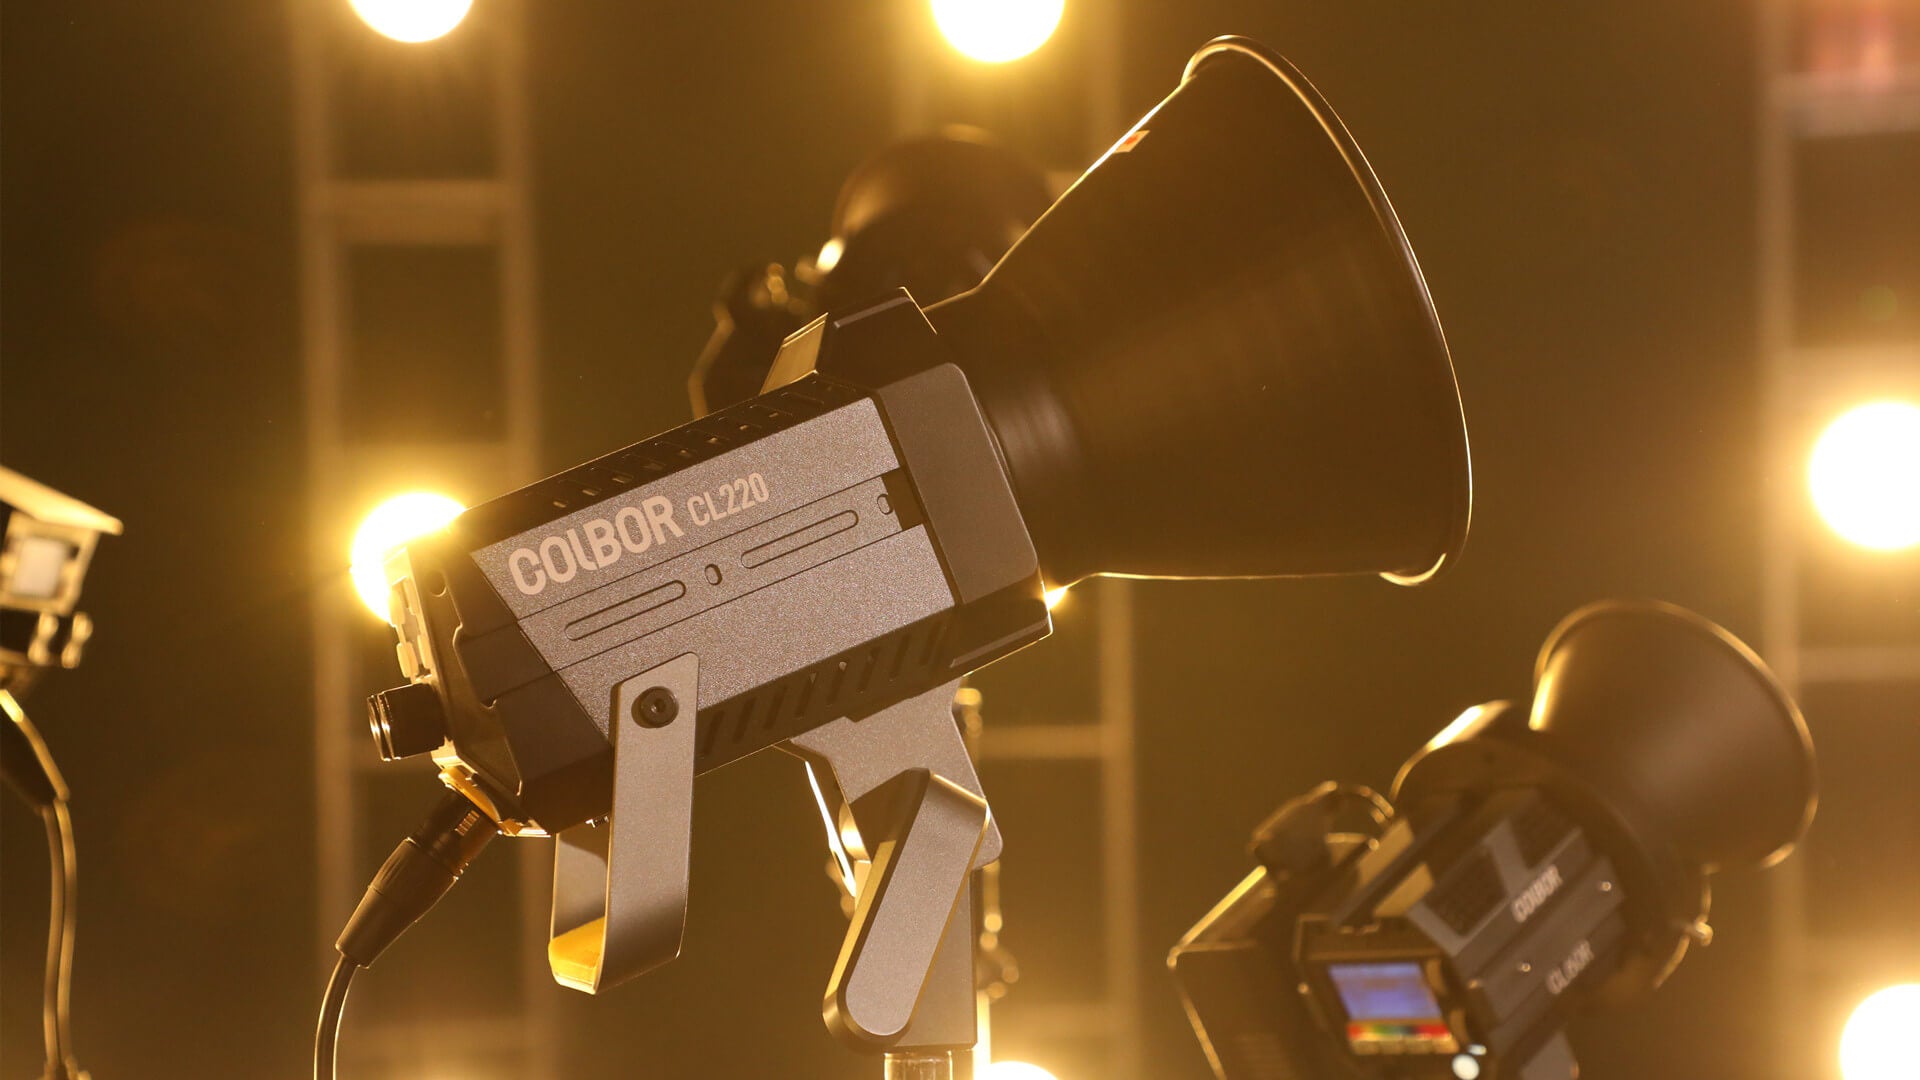 What are the best LED lights for video production at COLBOR?